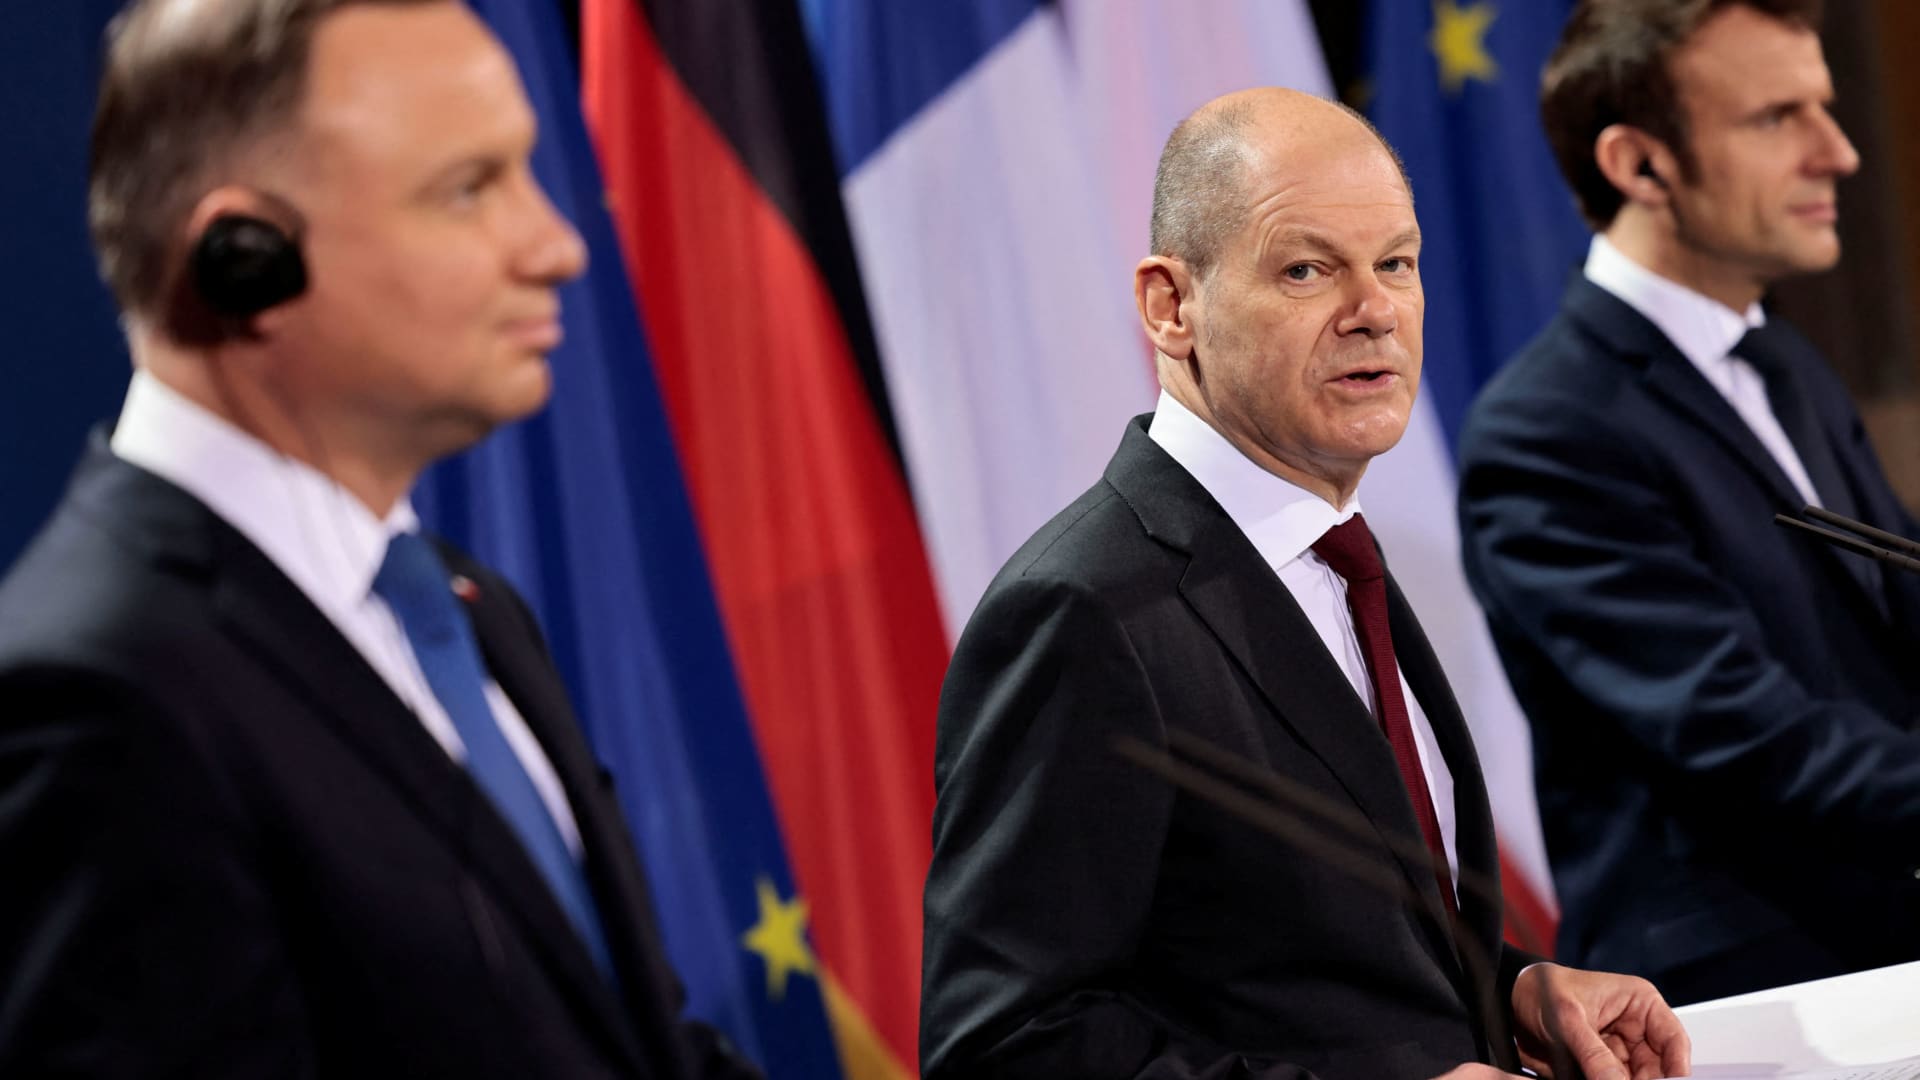 German Chancellor Olaf Scholz, French President Emmanuel Macron and Polish President Andrzej Duda attend a news conference ahead of a Weimar Triangle meeting to discuss the ongoing Ukraine crisis, in Berlin, Germany, February 8, 2022.